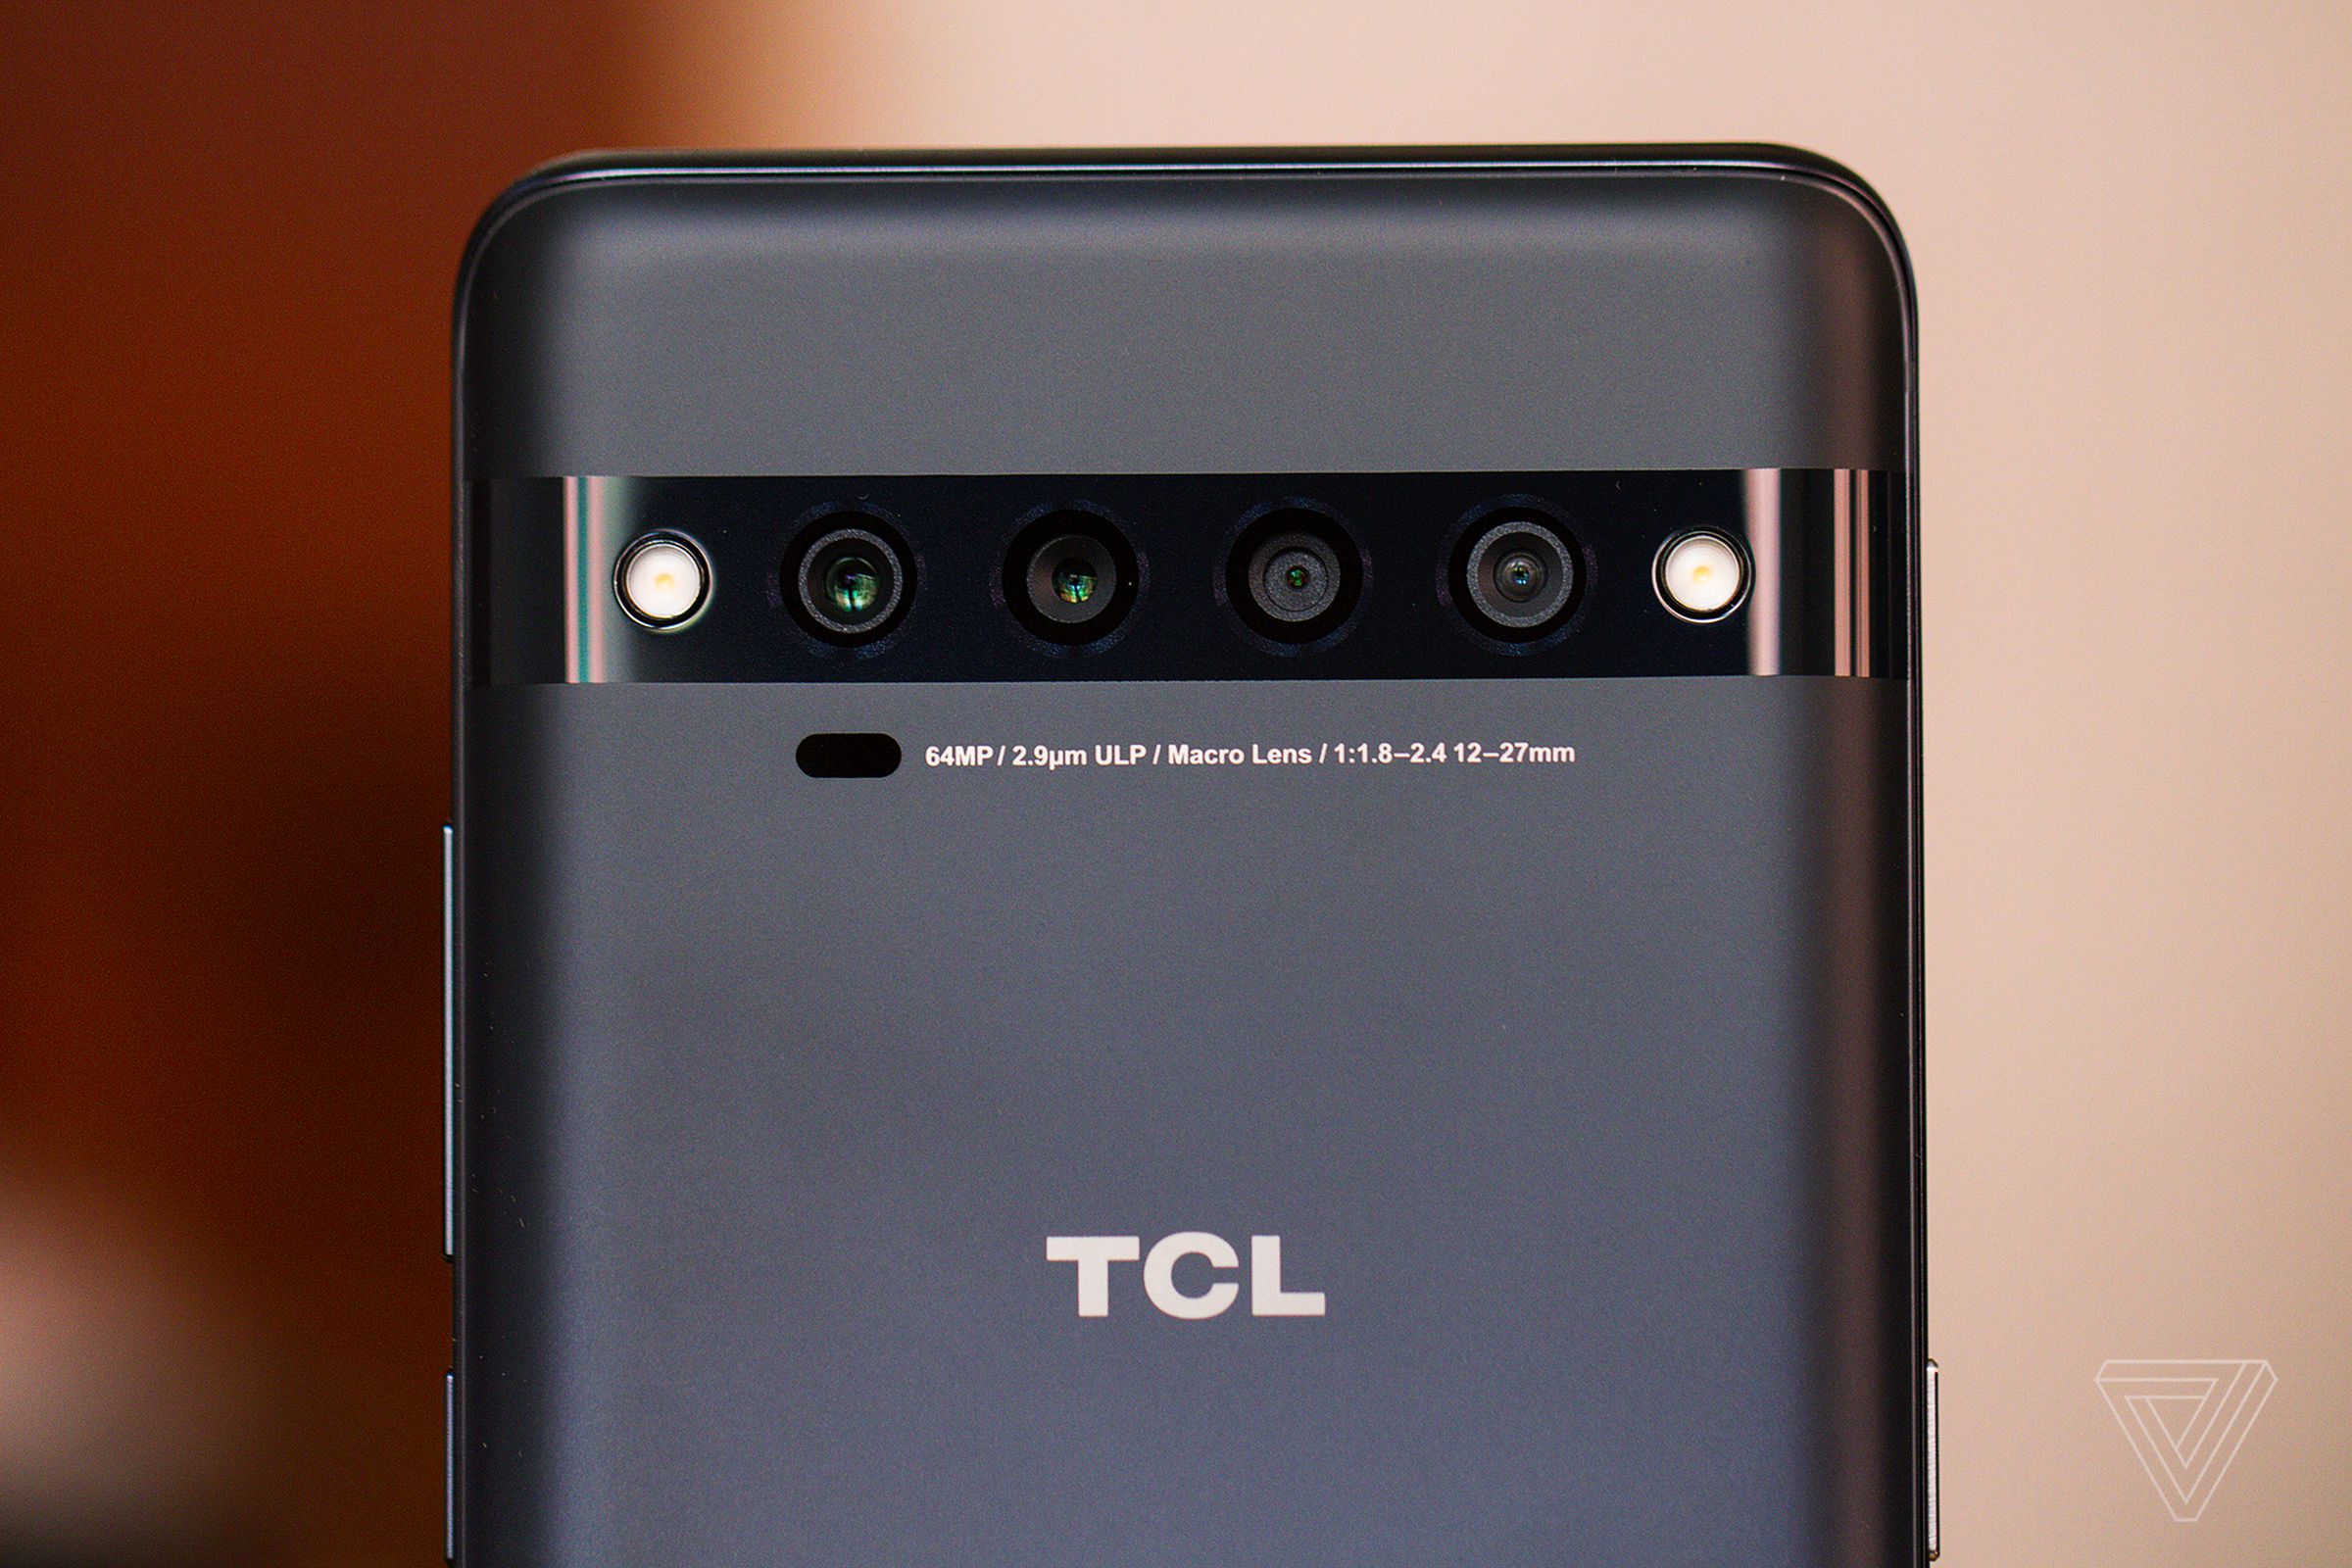 The rear cameras on the TCL 10 Pro